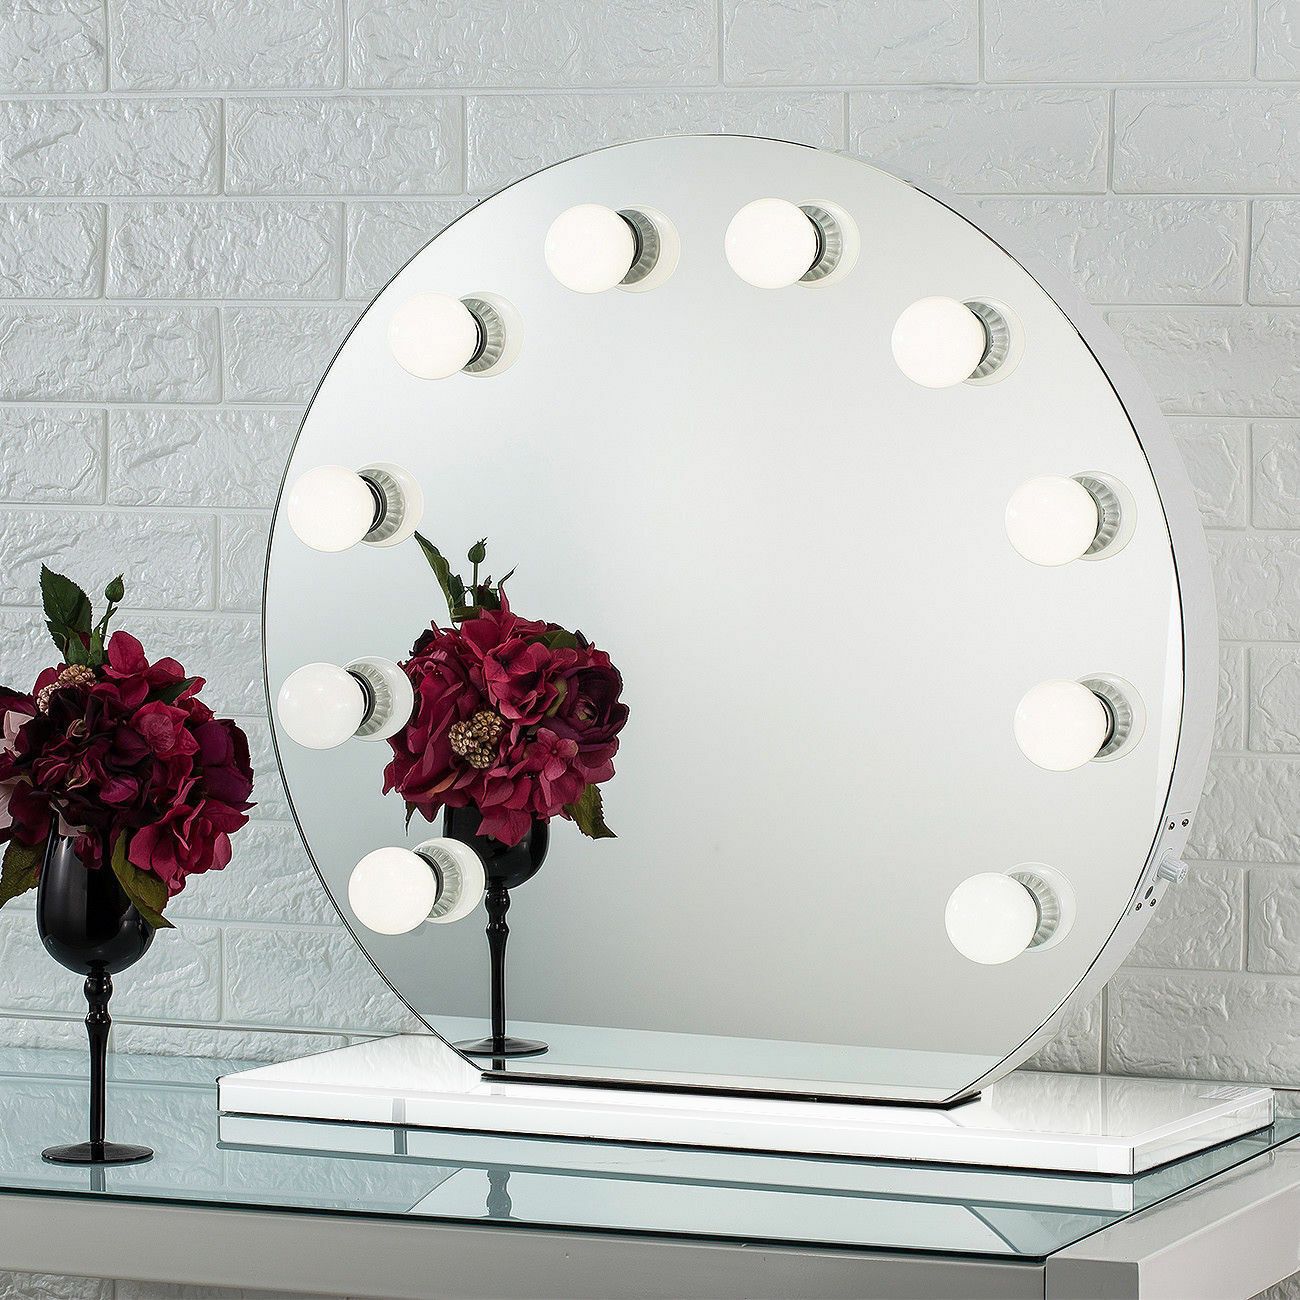 $130 New In Box Hollywood Vanity 28” Round Mirror 10 Dimmable LED Light Bulbs include USB Outlet 